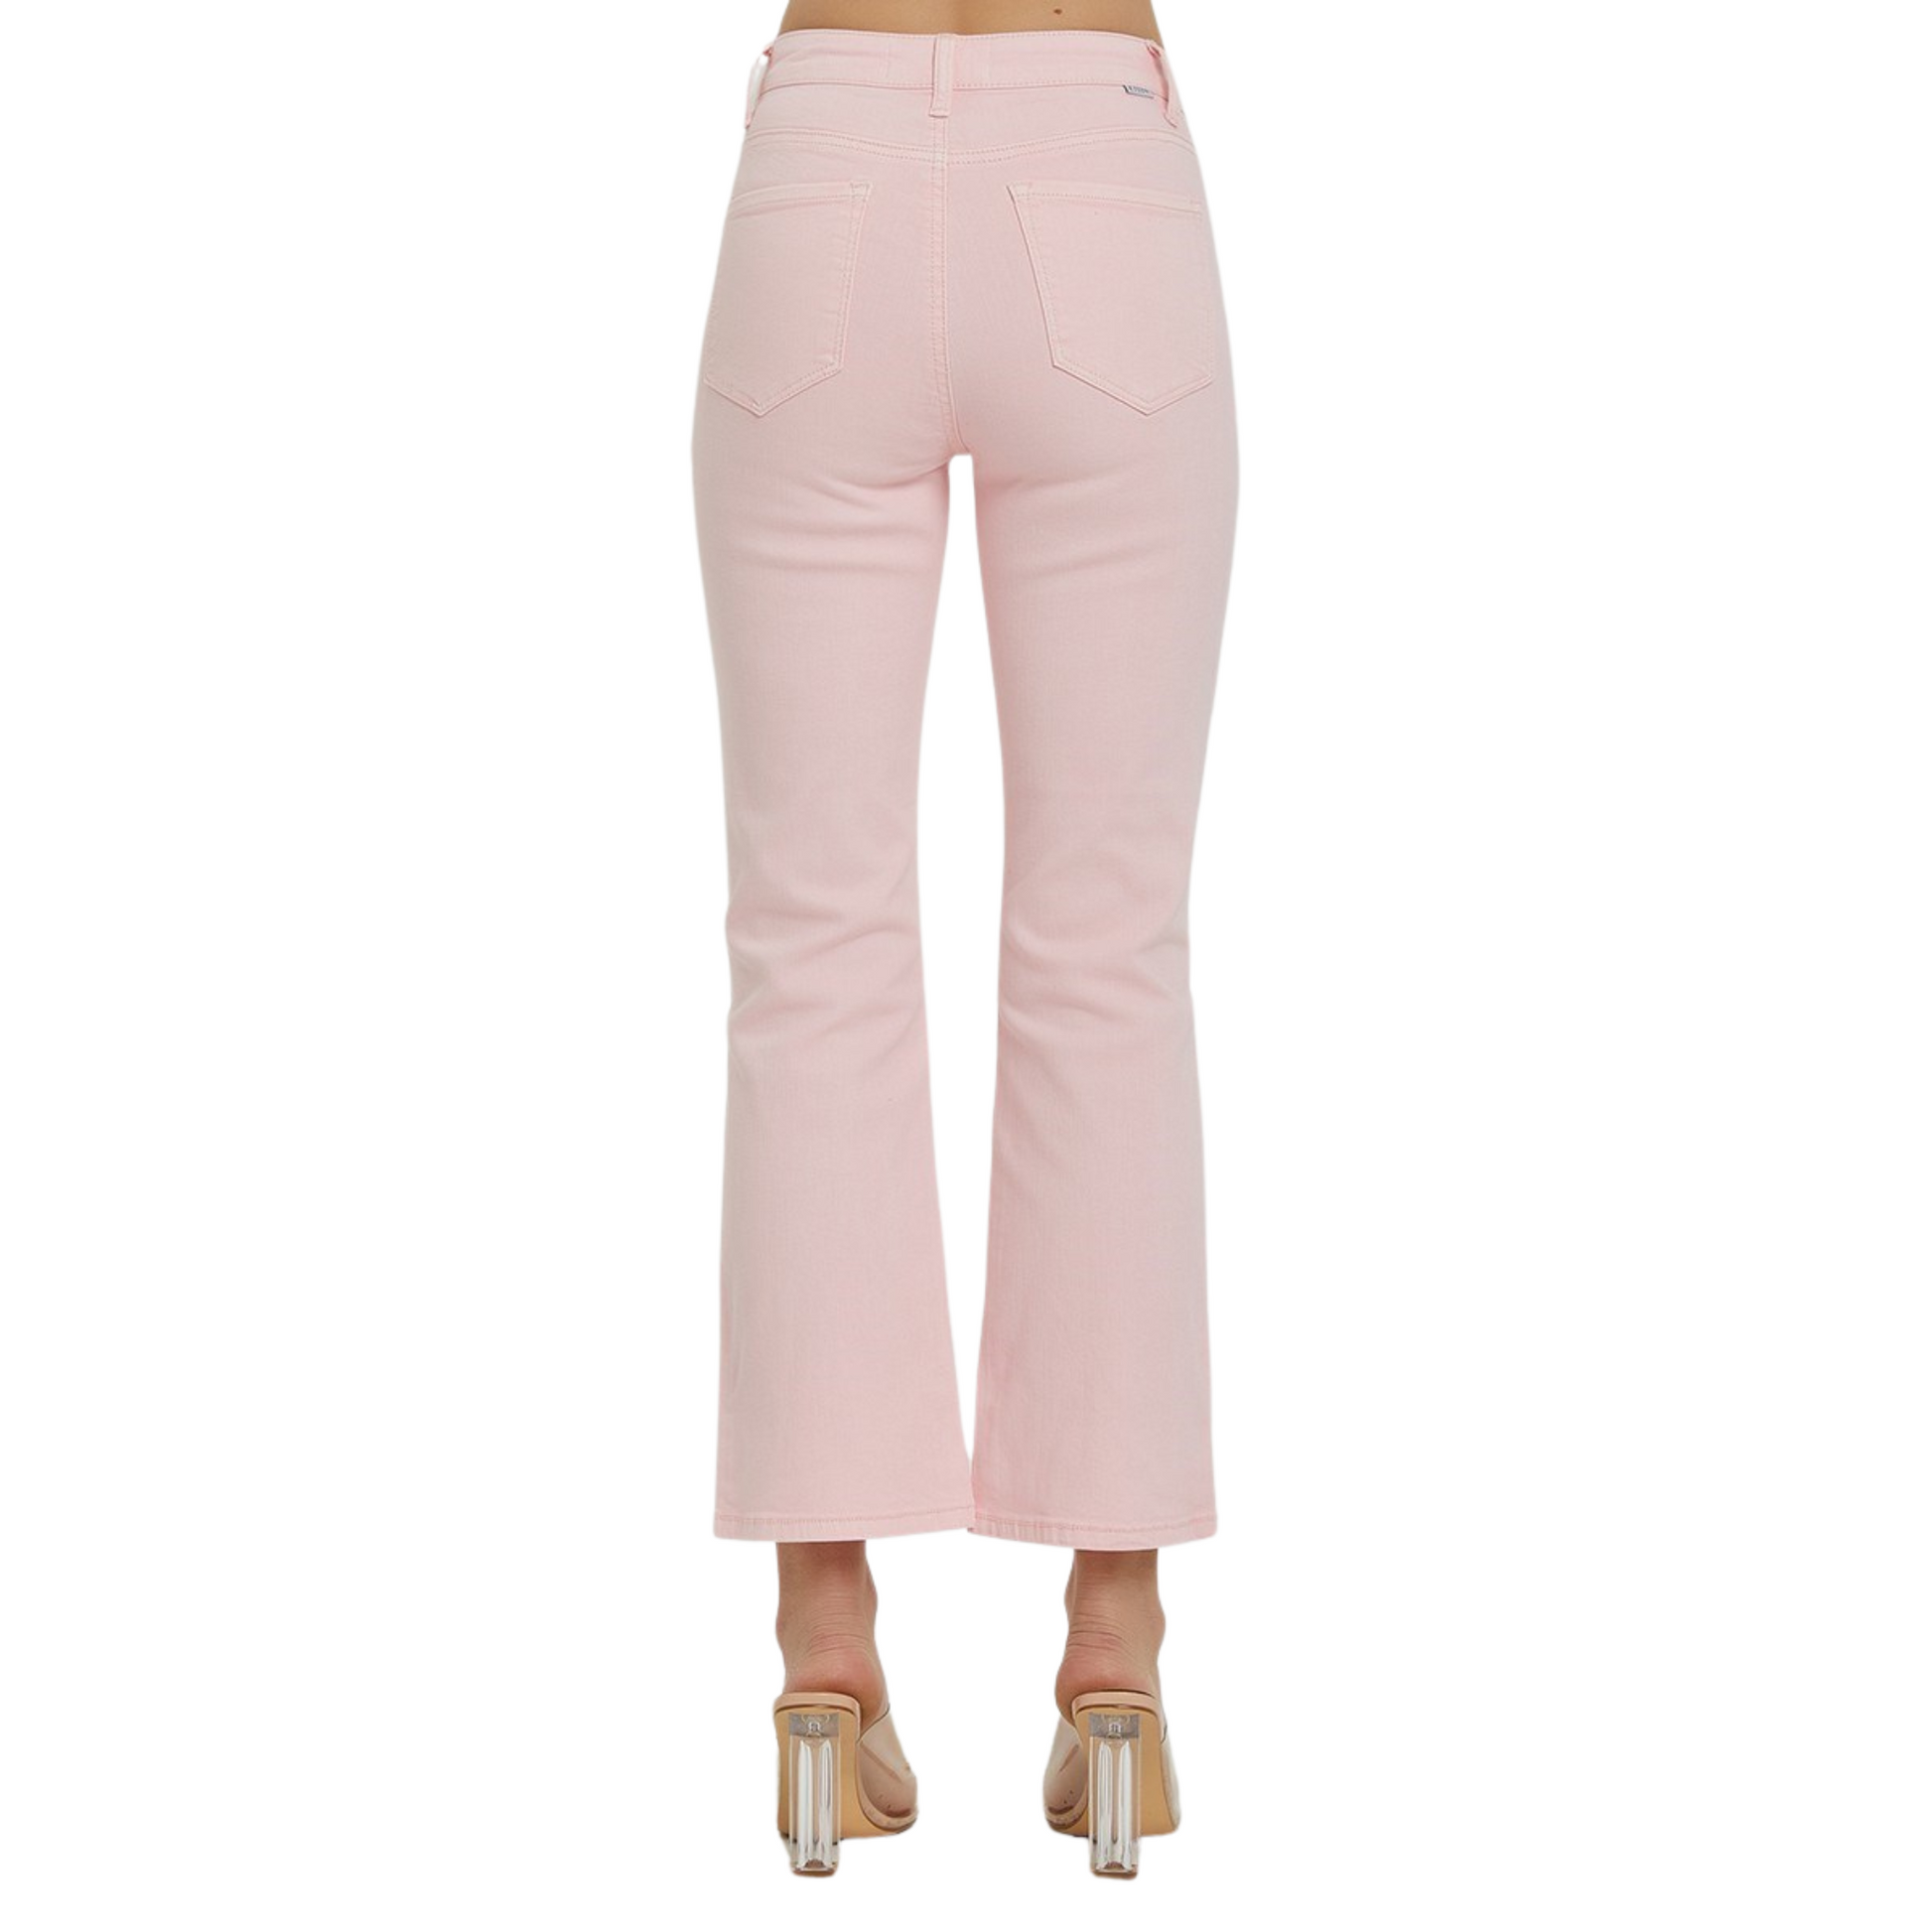 These Mid Rise Straight Jeans in a soft pink color from the Risen brand offer a comfortable mid rise fit and a classic straight leg design. Perfect for everyday wear, these jeans provide a flattering silhouette and stylish versatility.